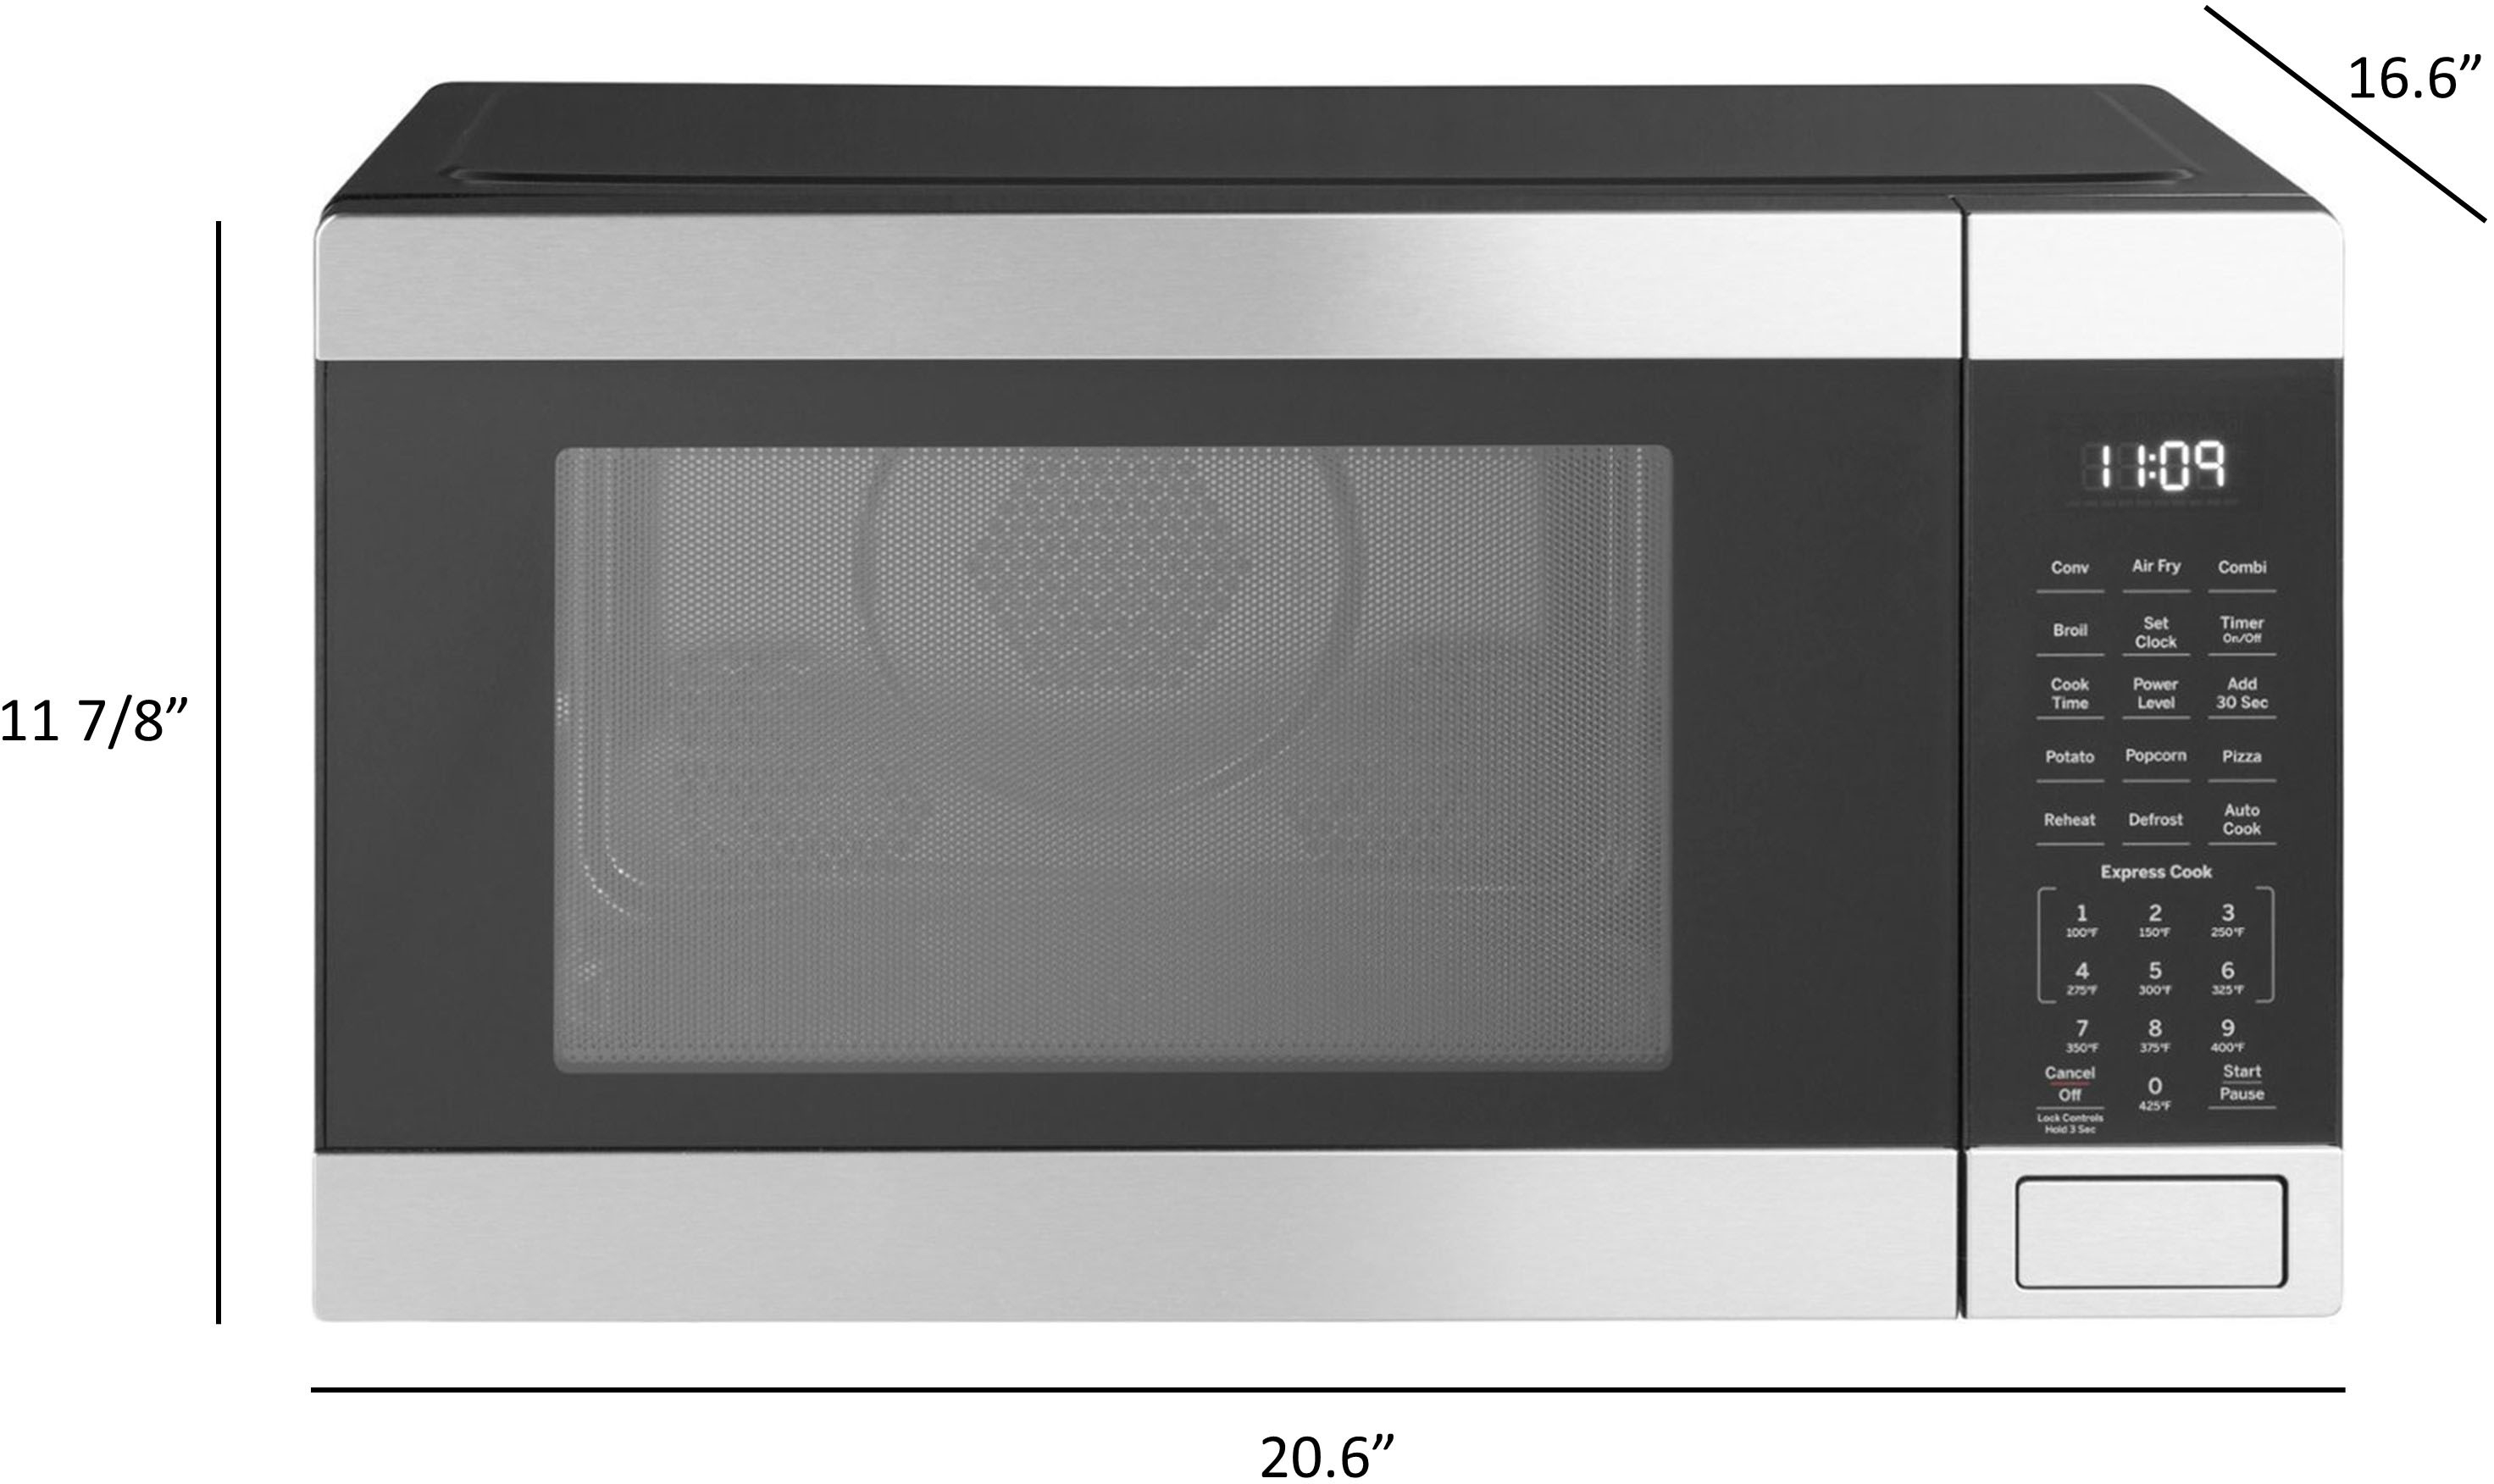 GE - 1.0 Cu. Ft. Convection Countertop Microwave with Air Fry - Black Stainless Steel